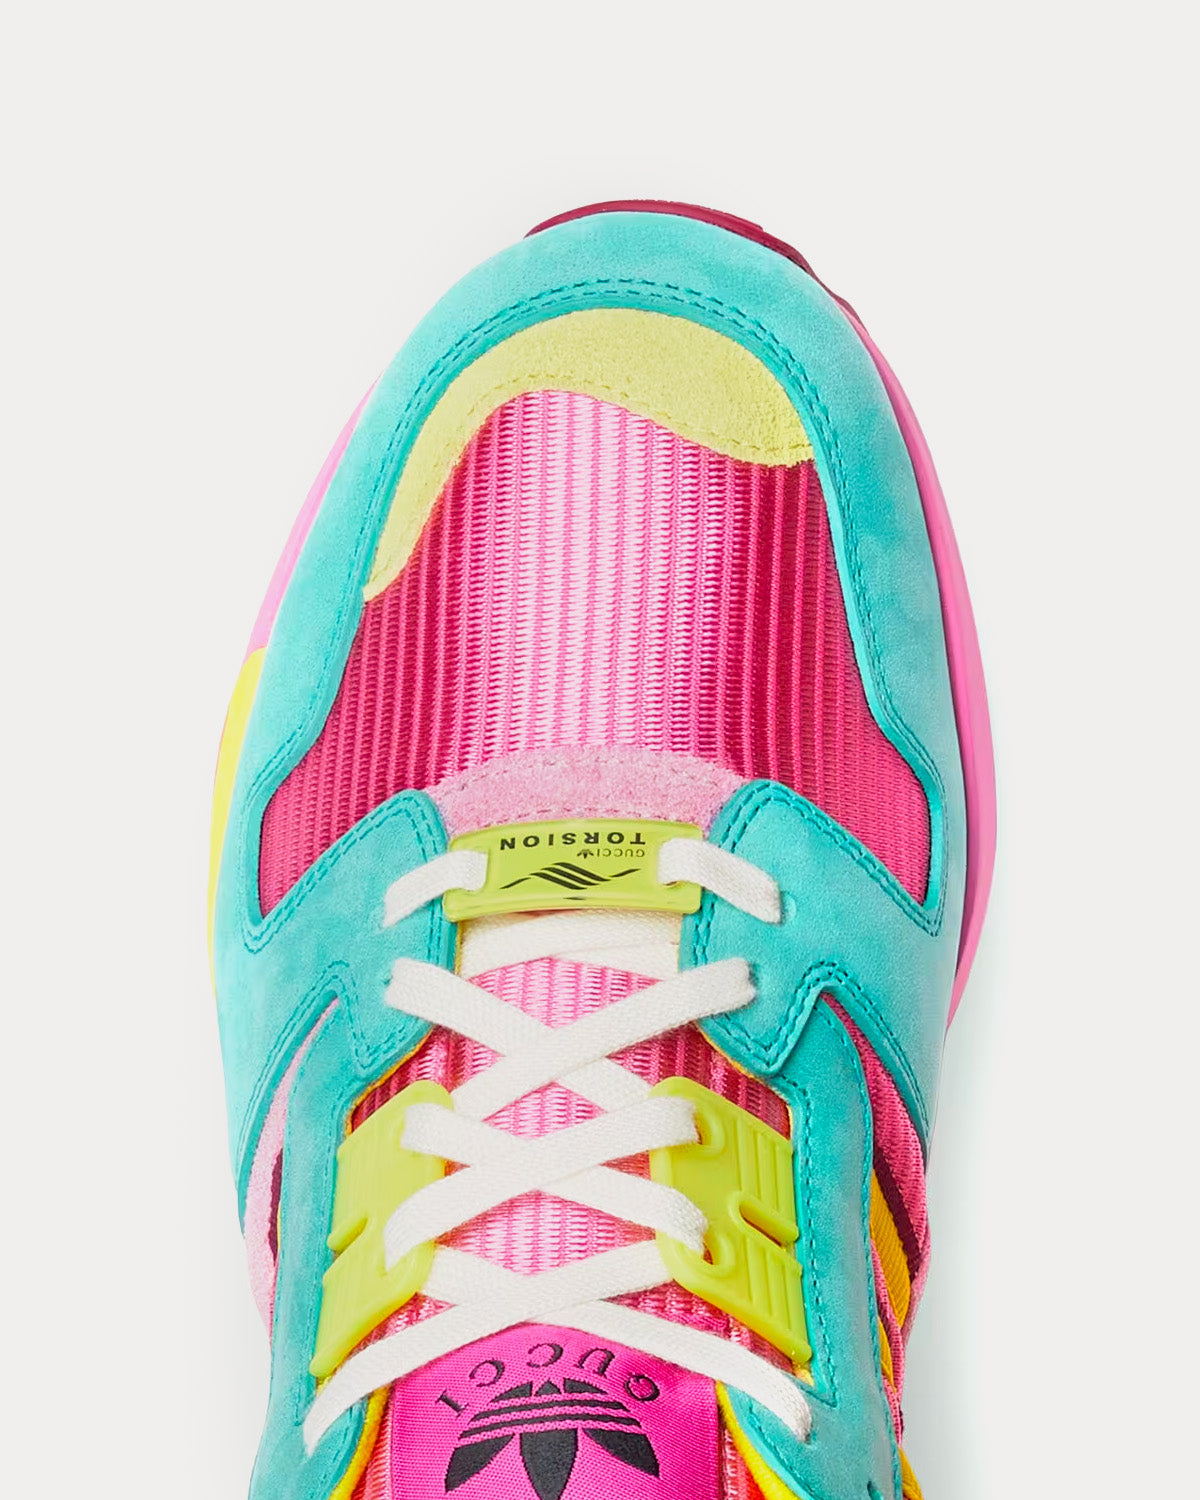 Adidas x Gucci - ZX8000 Leather Pink / Aquamarine Low Top Sneakers